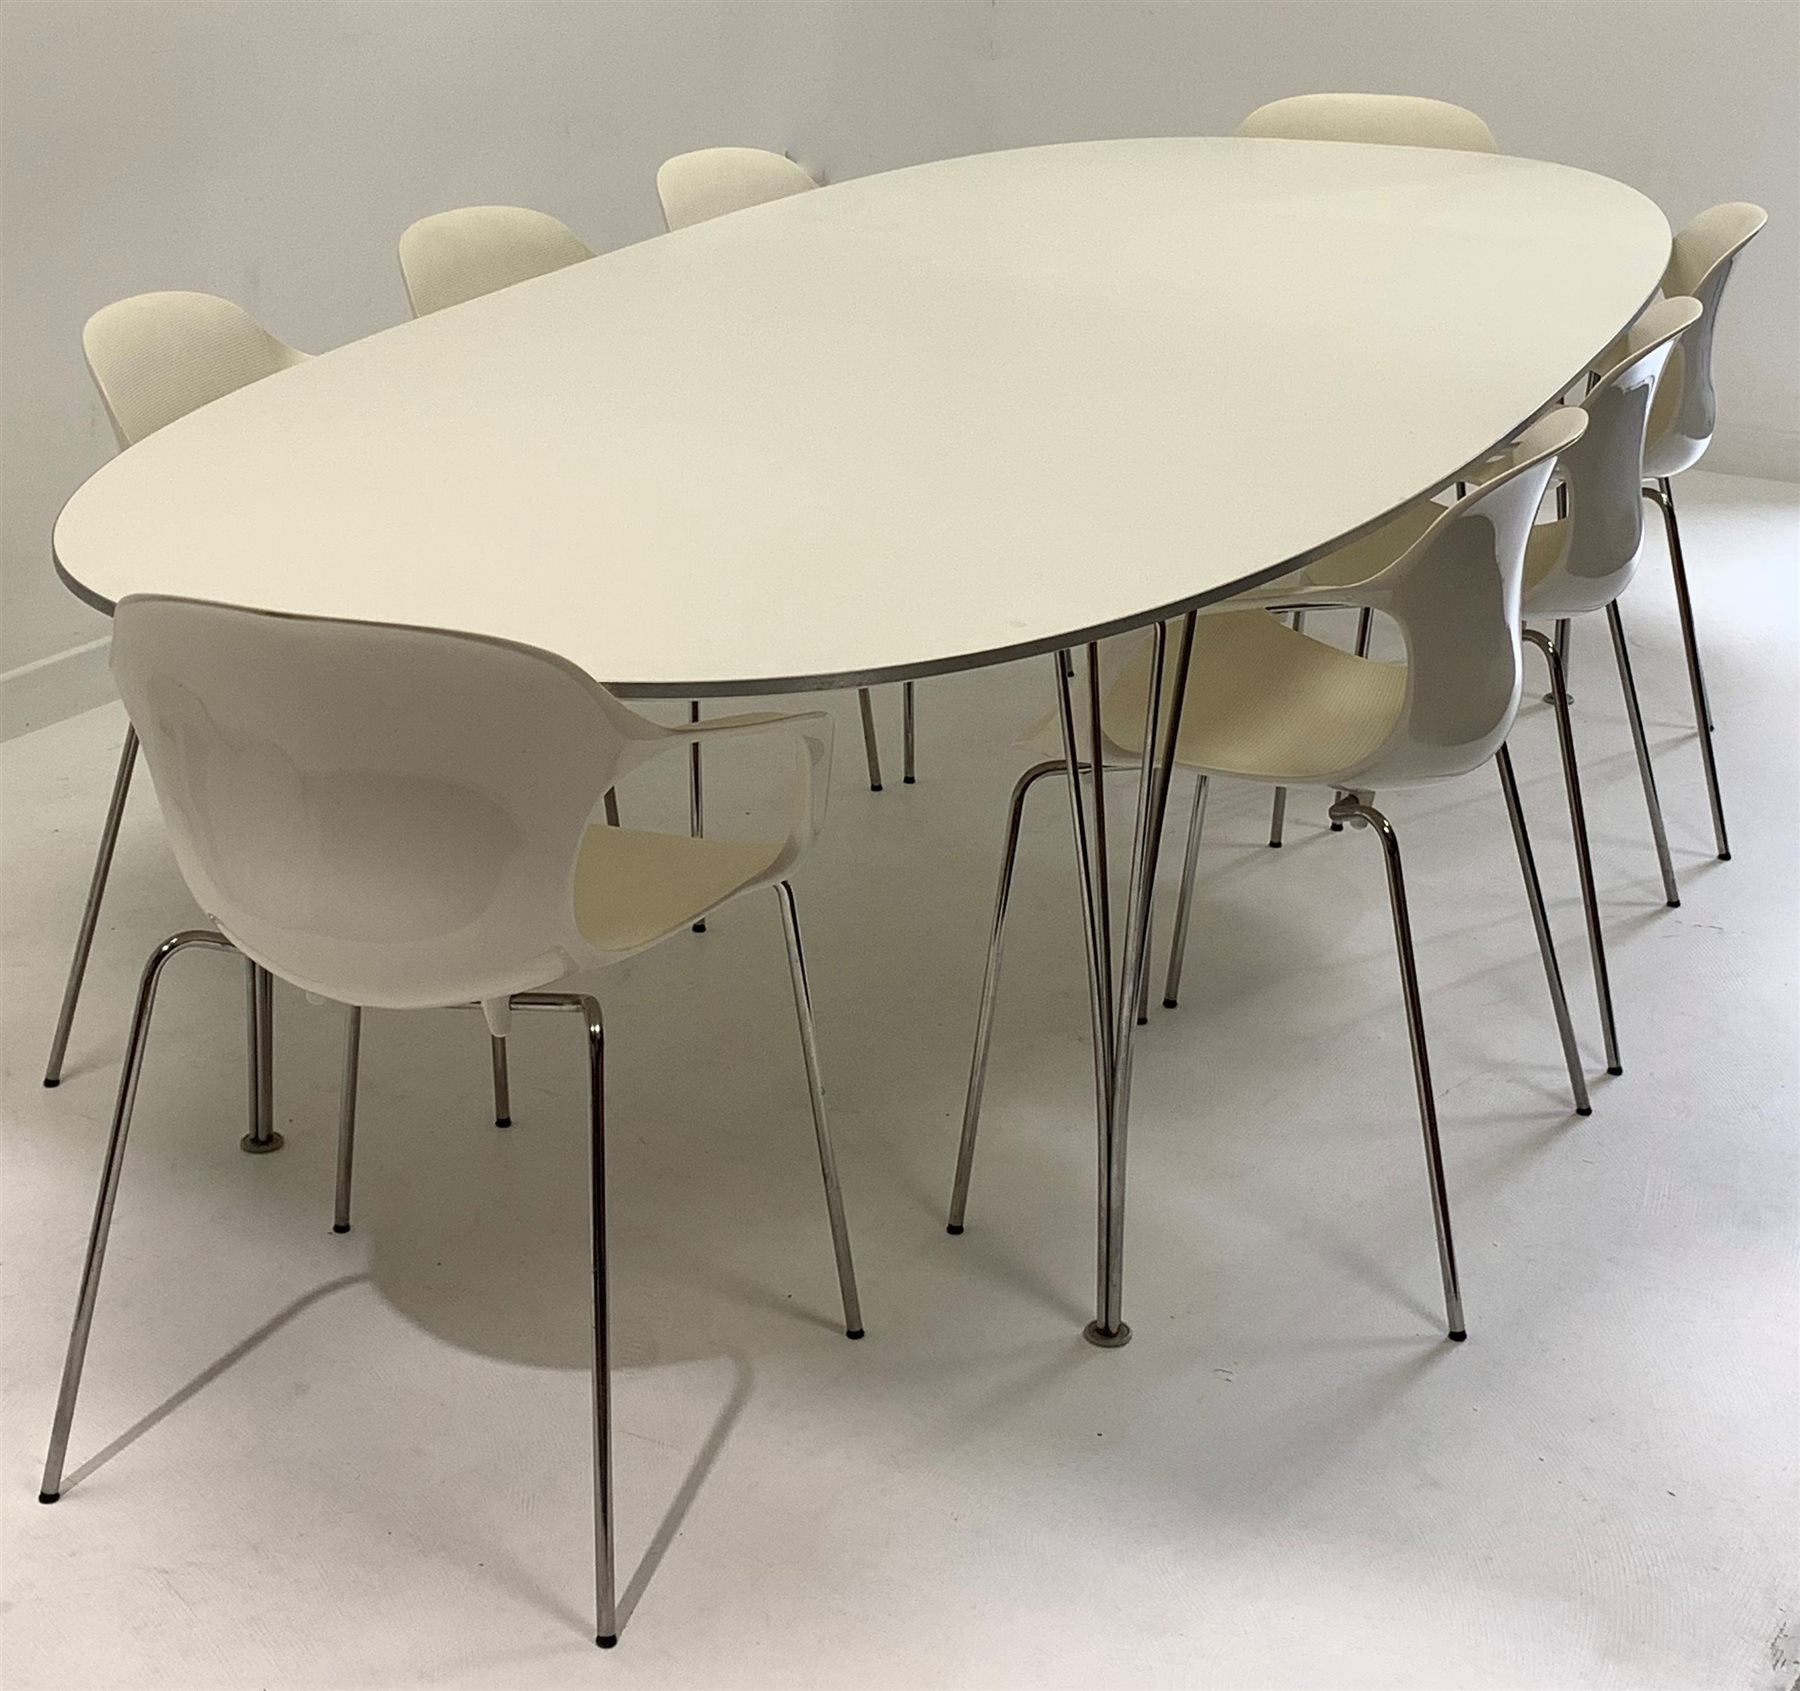 Arne Jacobson et al. for Fritz Hansen - Contemporary 'Super Elliptical' dining table with white lam - Image 2 of 6